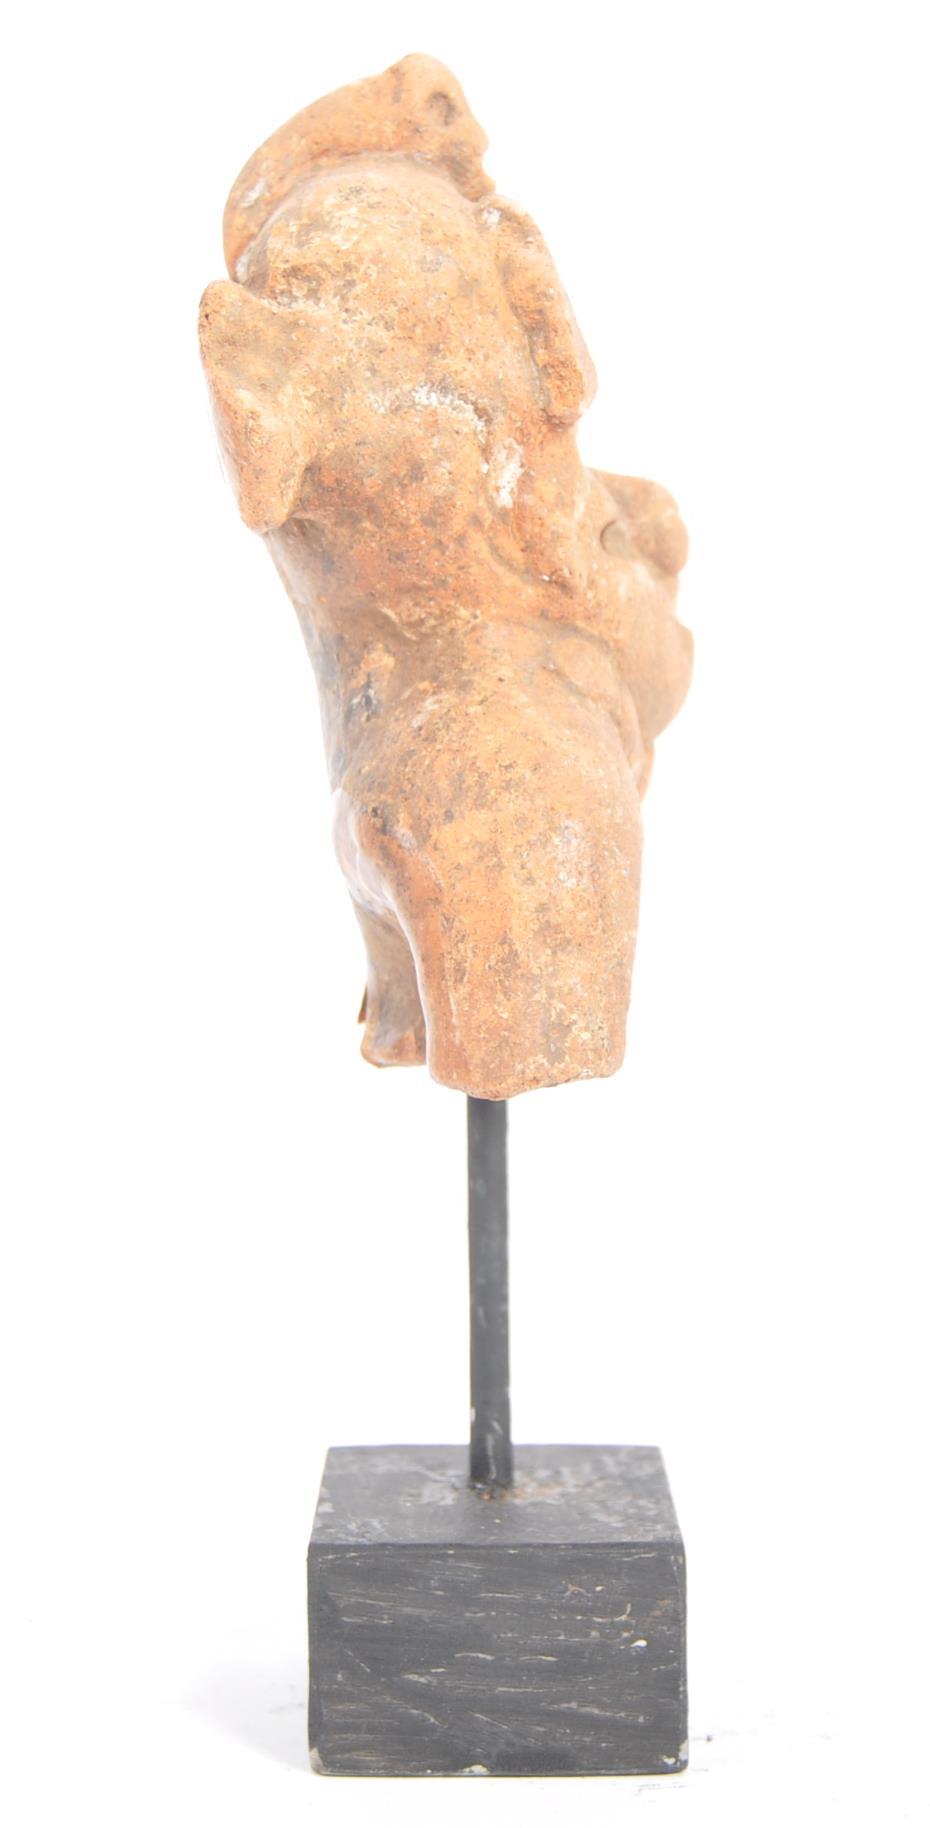 PRE COLUMBIAN FIGURE ON STAND - Image 2 of 5